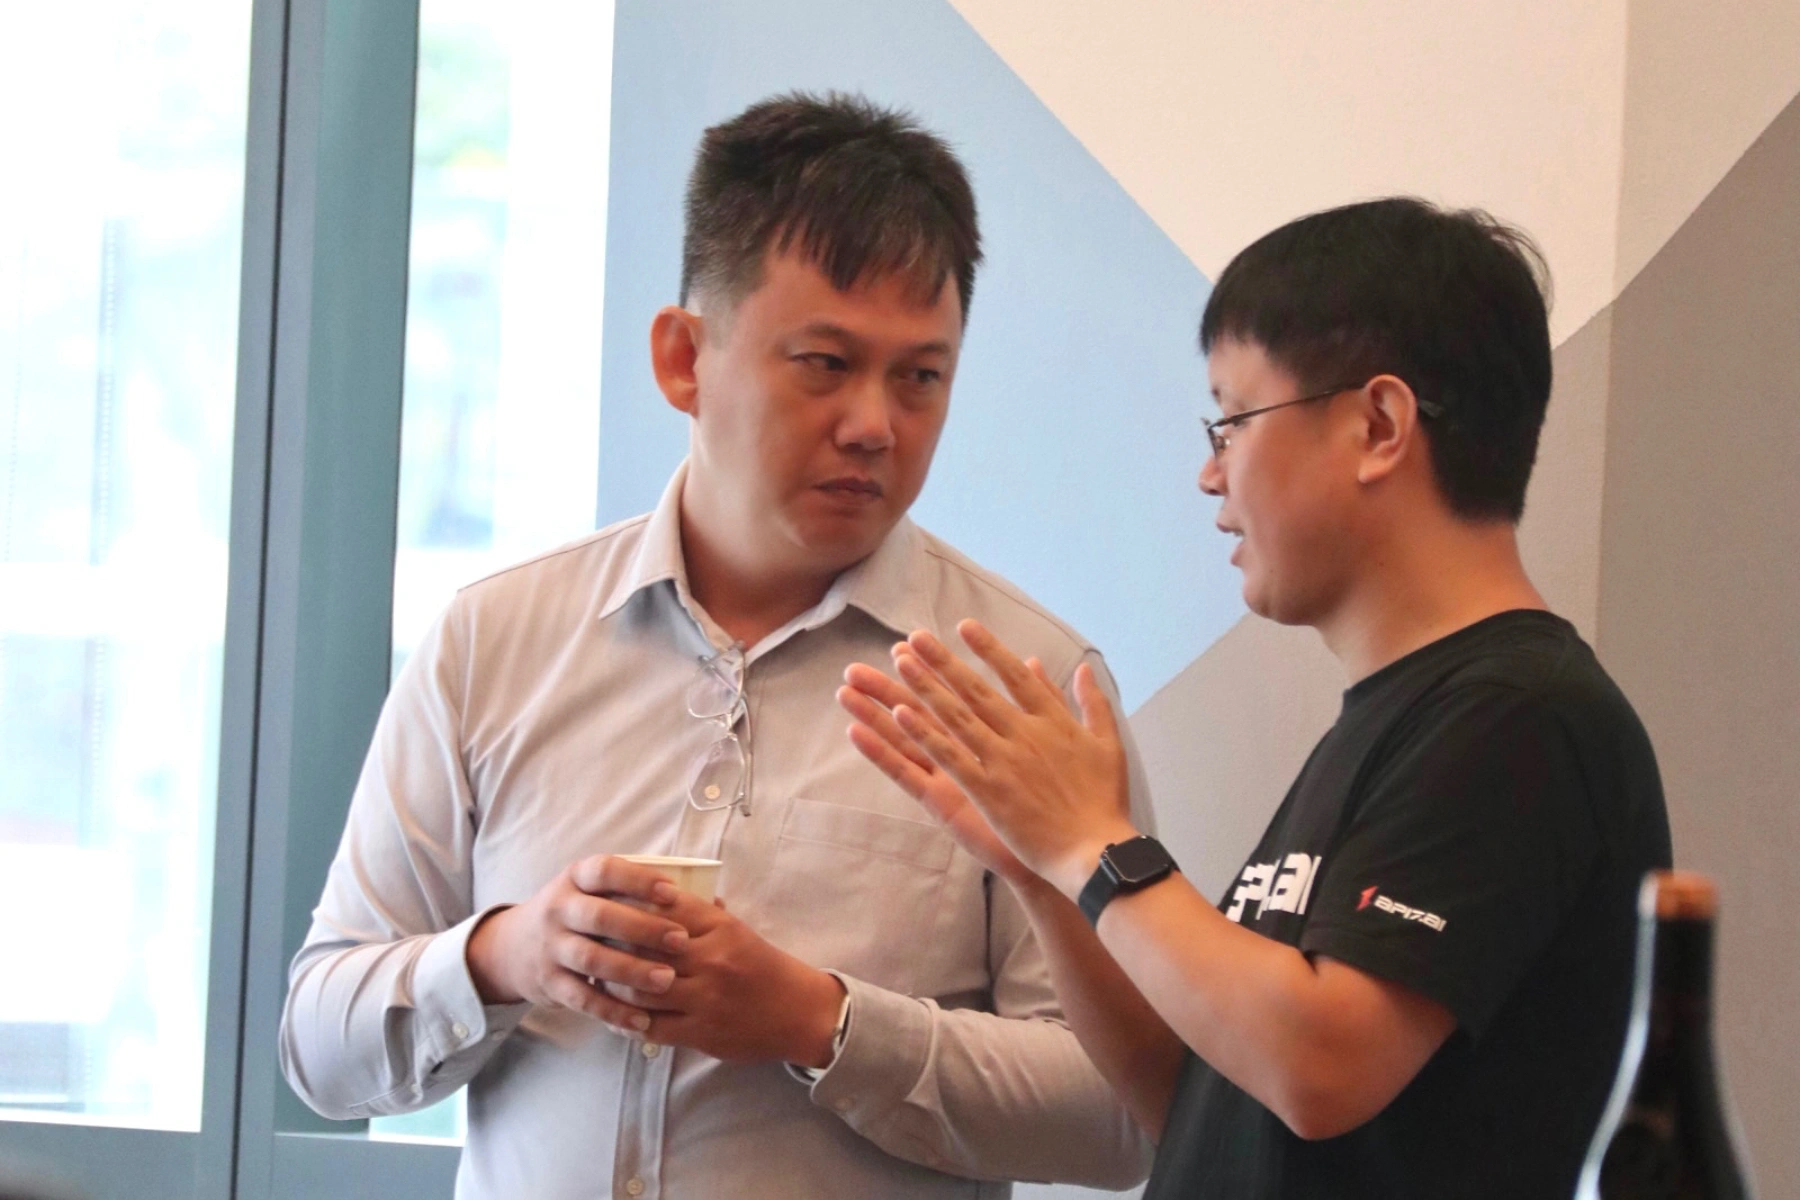 Yuansheng (on the right) is discussing technical details with the audience